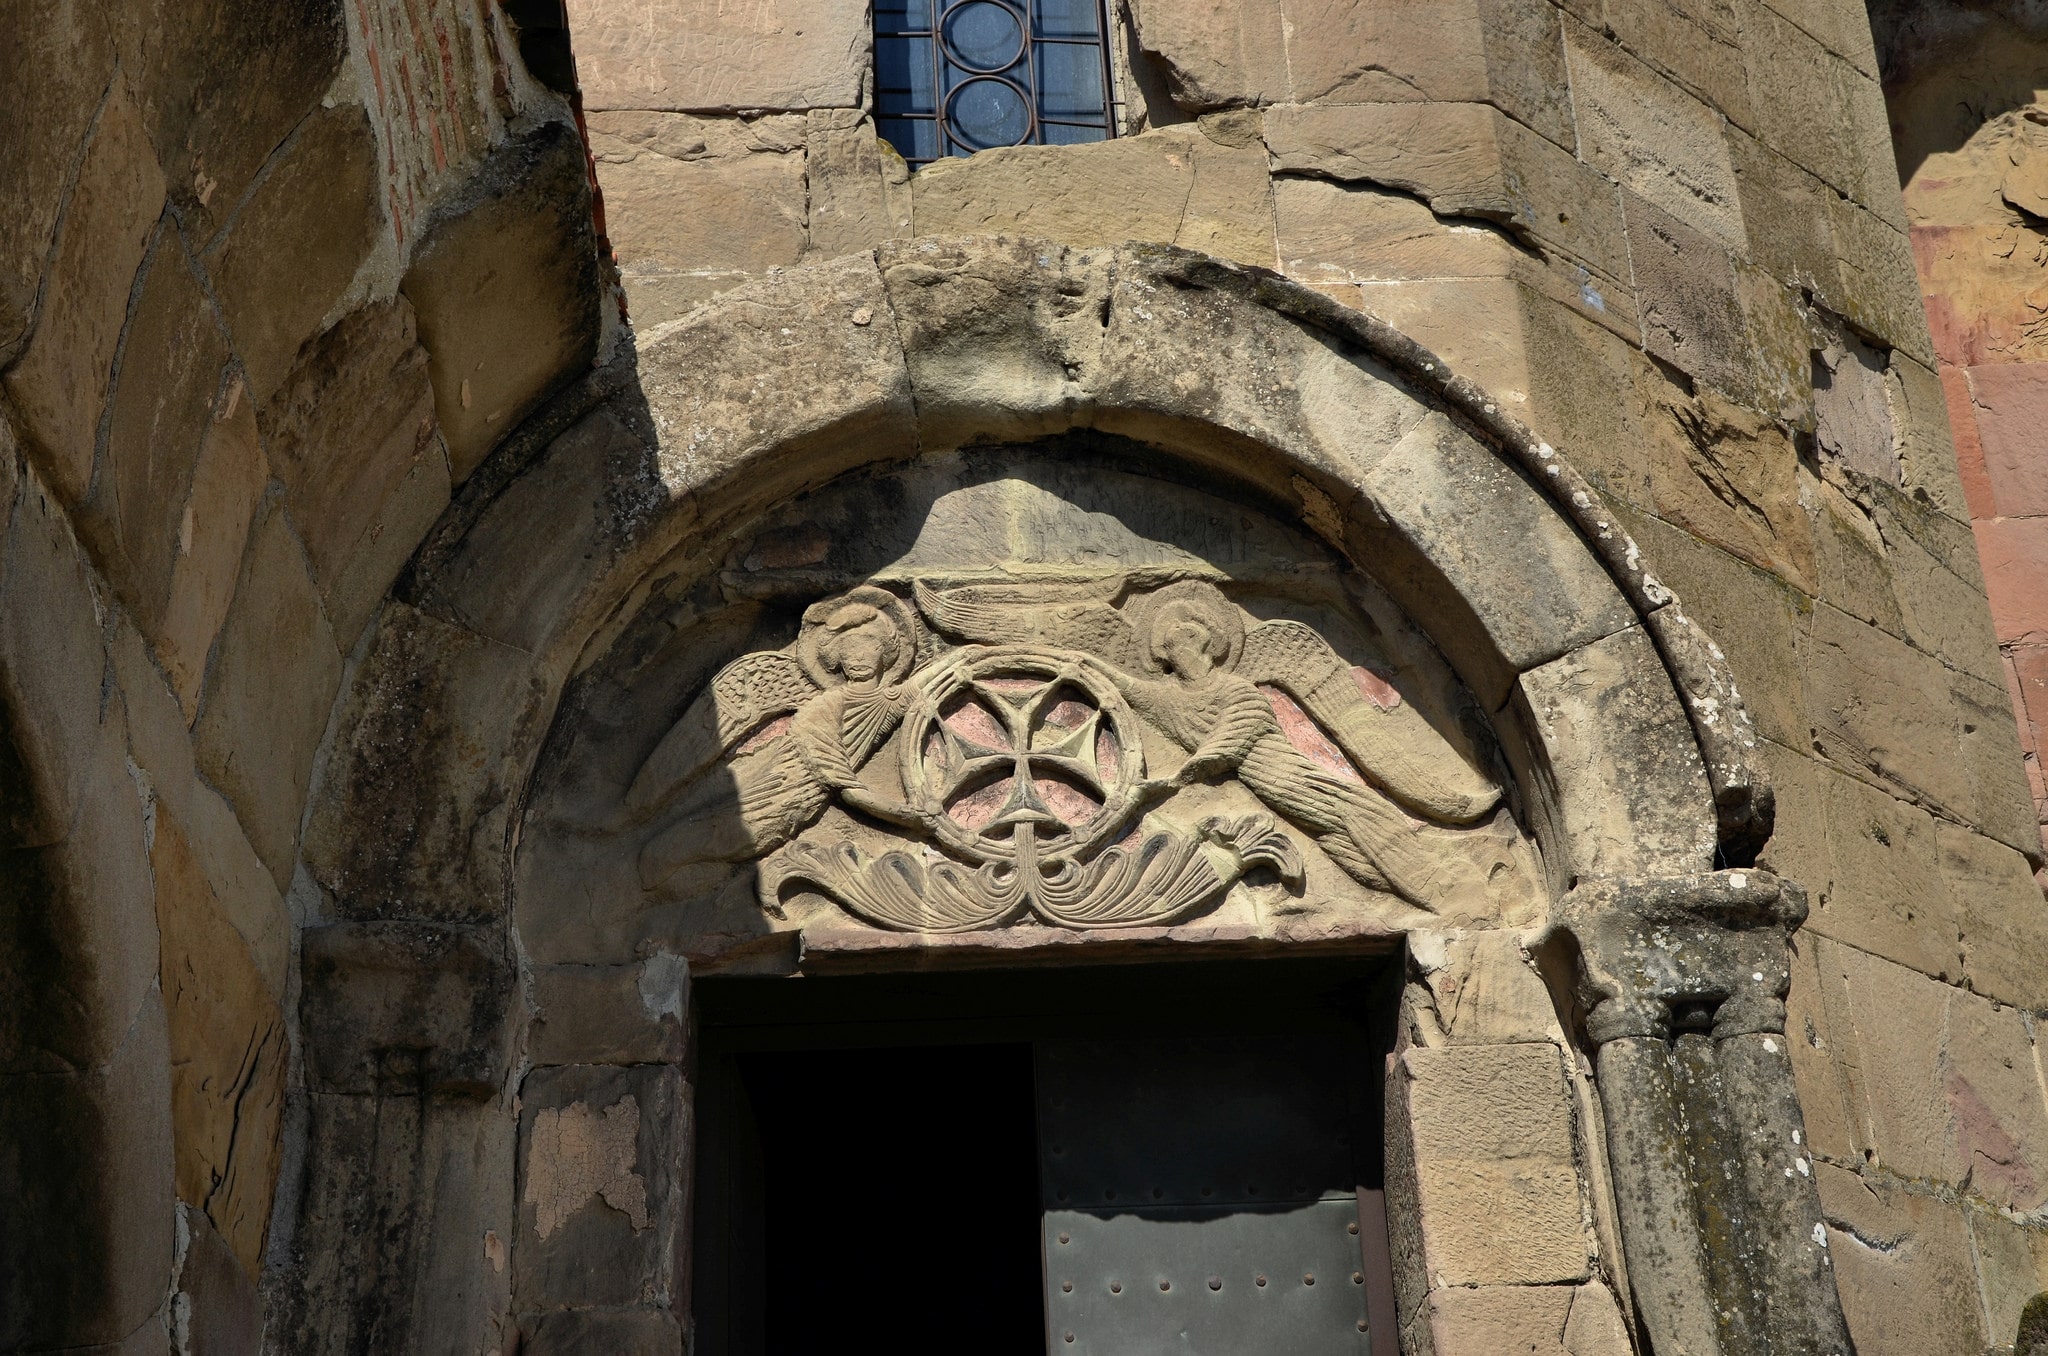 Outer facades of the monastery decorated with bas-relief structures